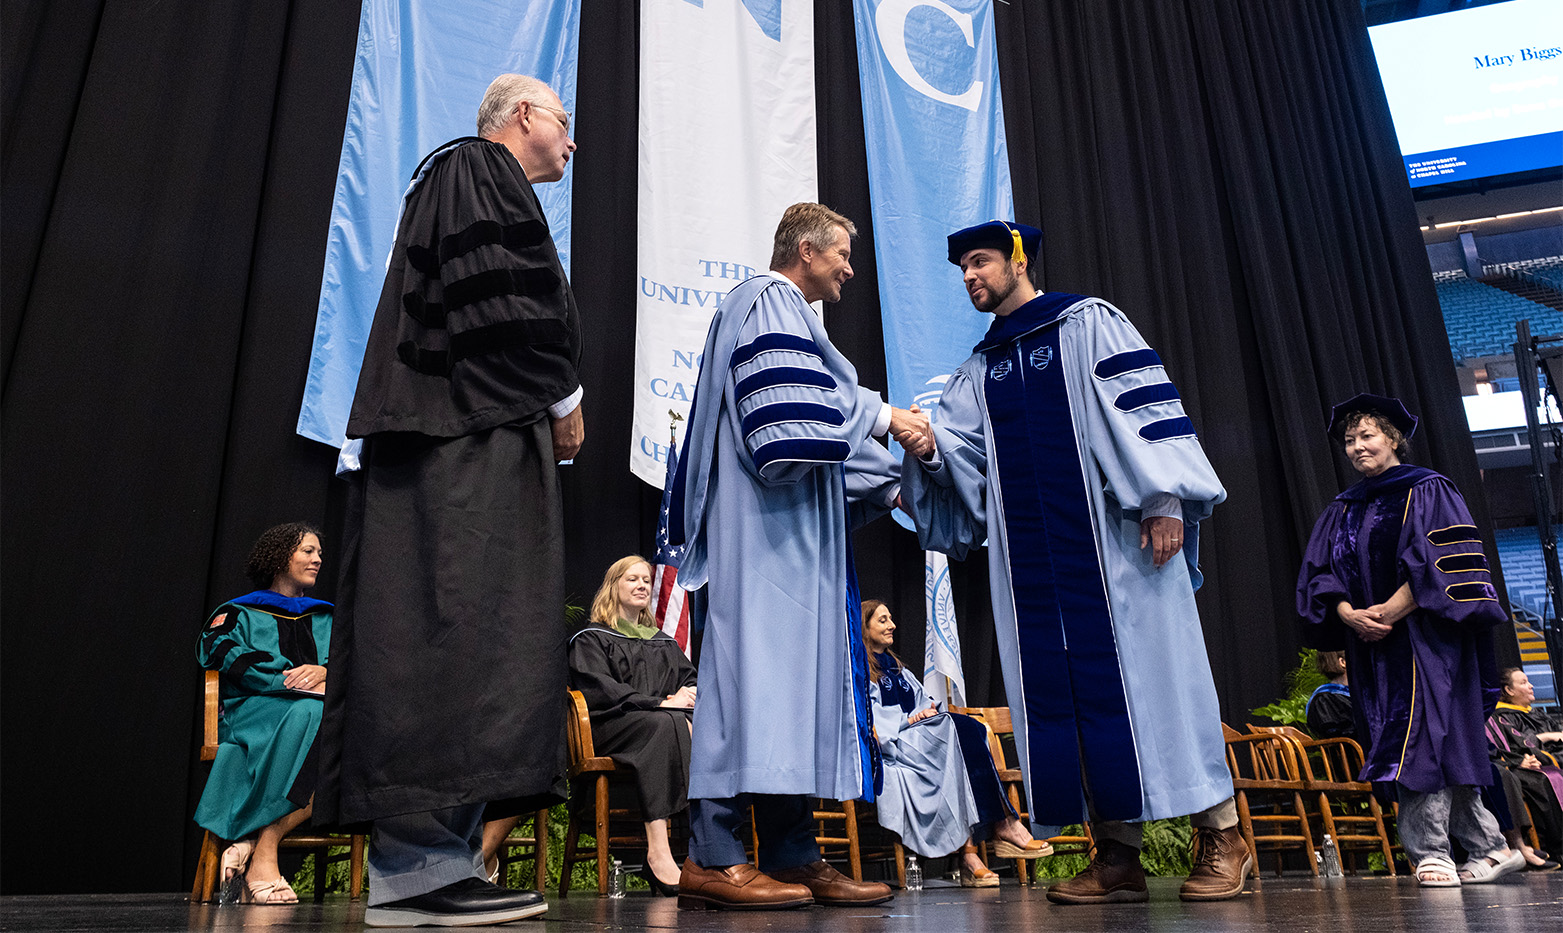 A doctoral graduate shakes hands with the chancellor on stage.